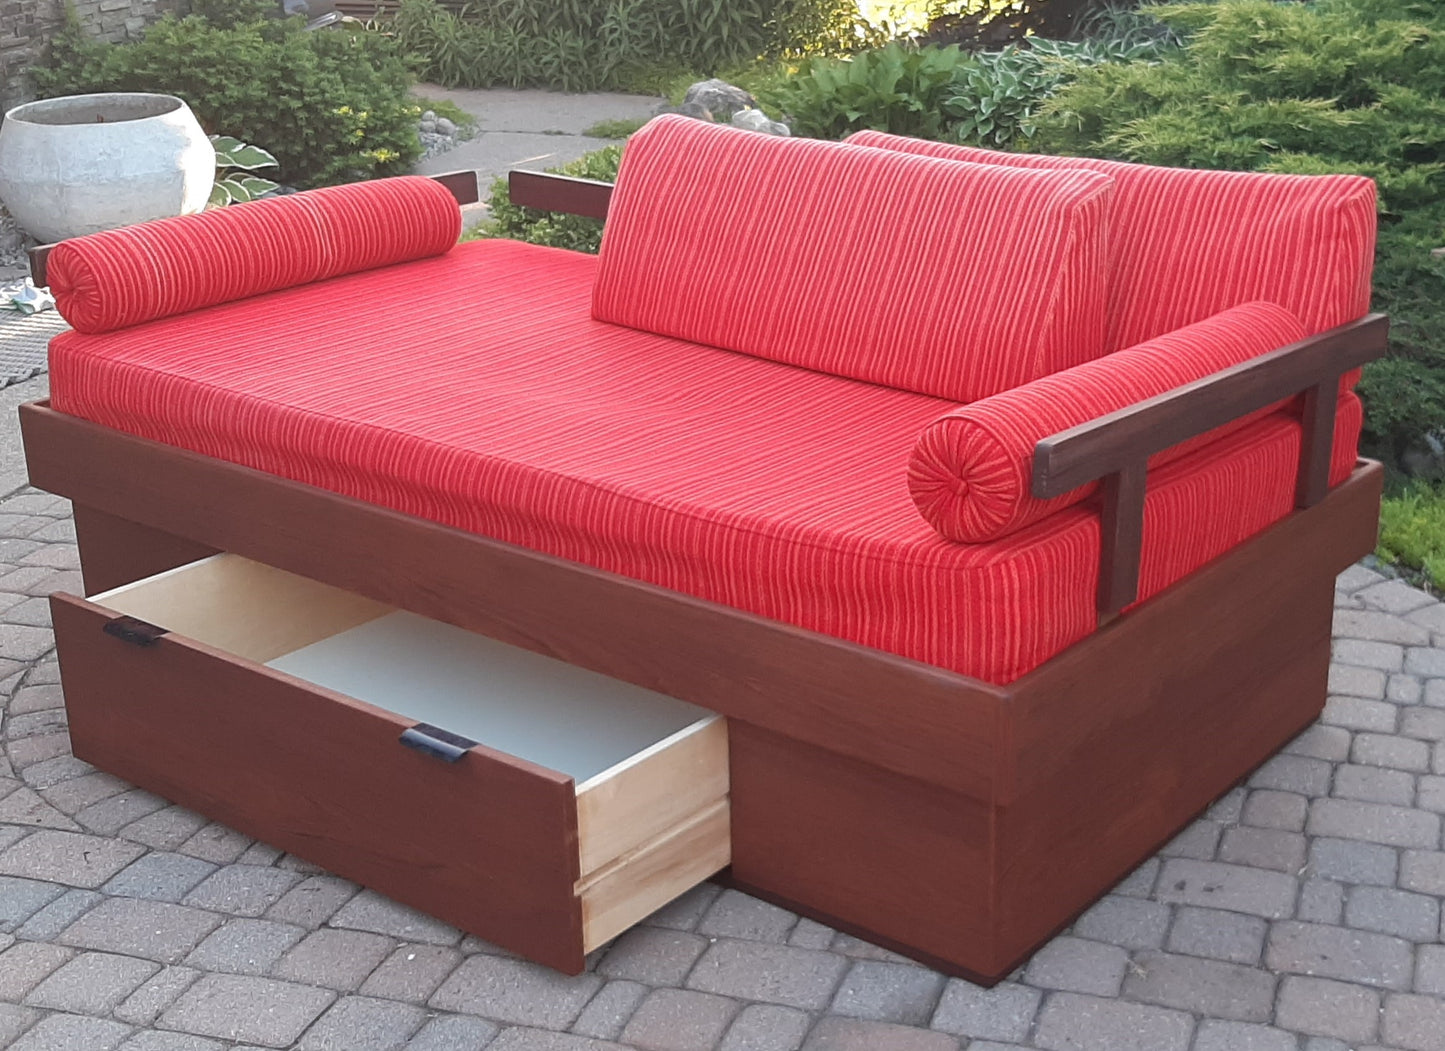 REFINISHED MCM Teak Daybed with storage drawer, PERFECT